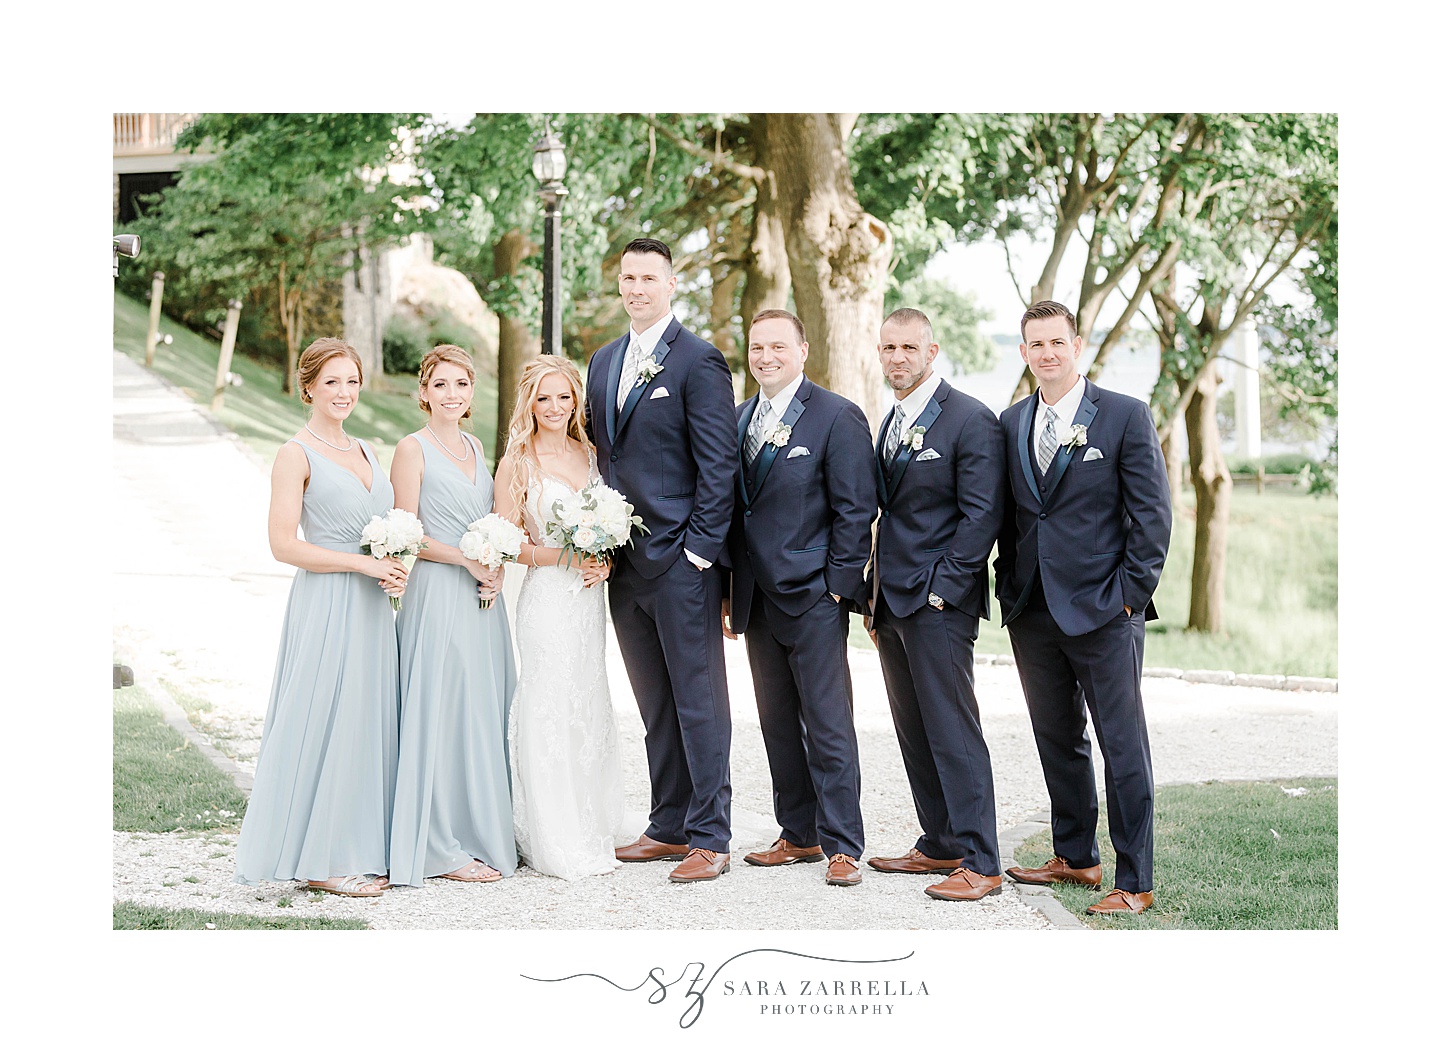 newlyweds stand with bridal party in blue gowns and suits